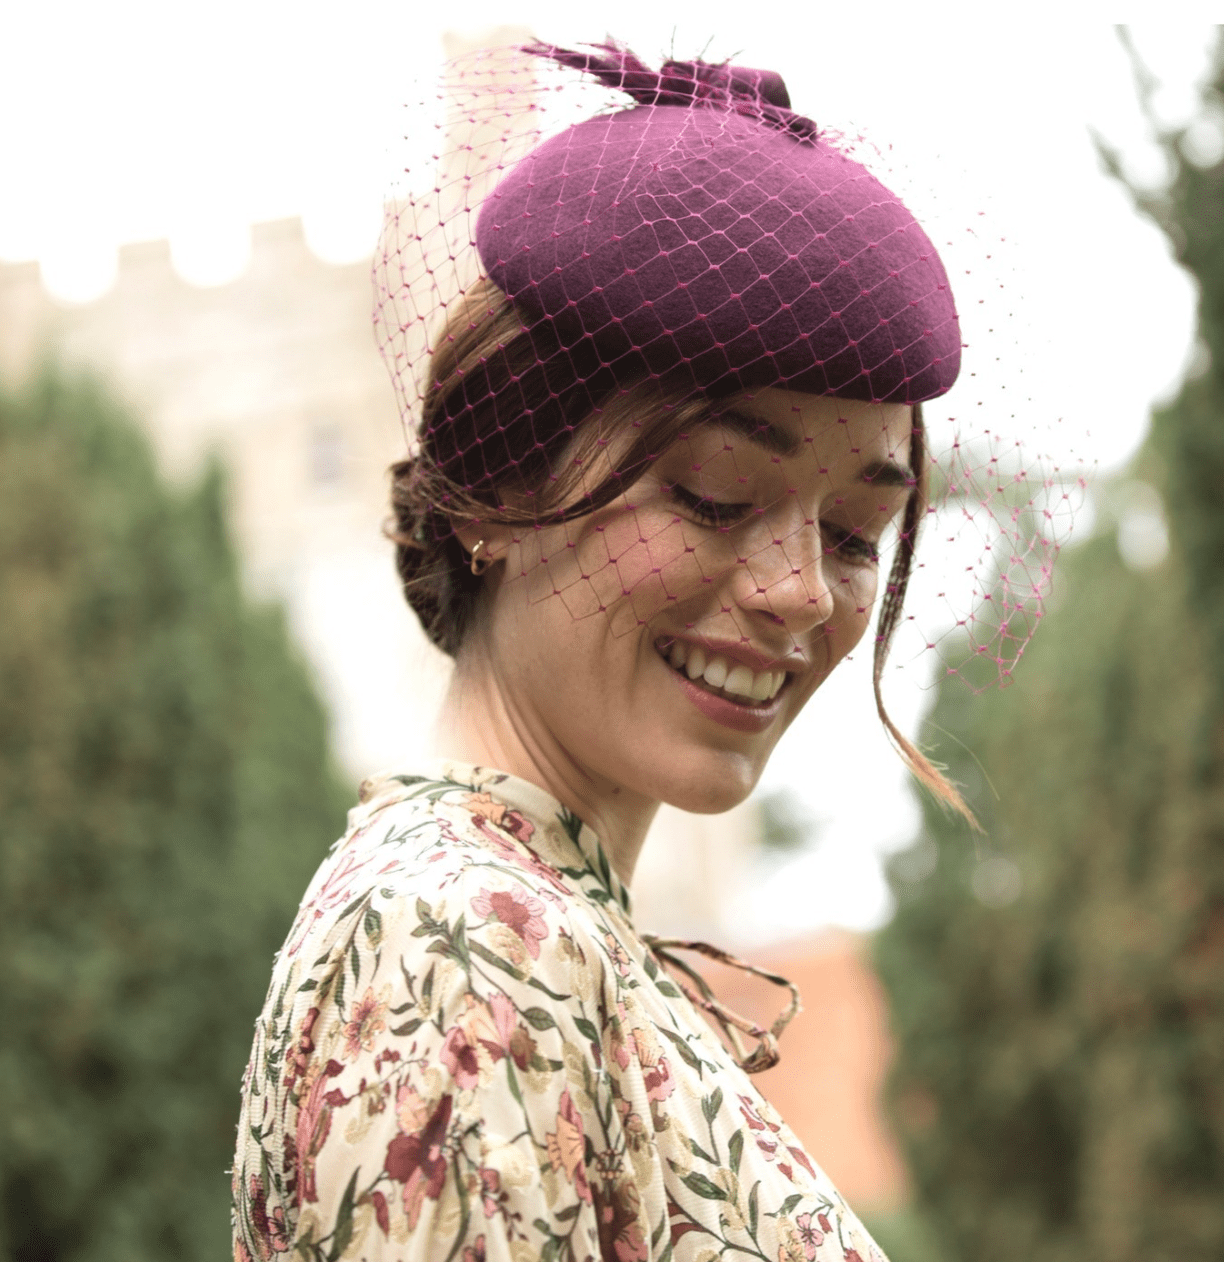 a woman with a raspberry pillbox hat looks down towards her floral dress